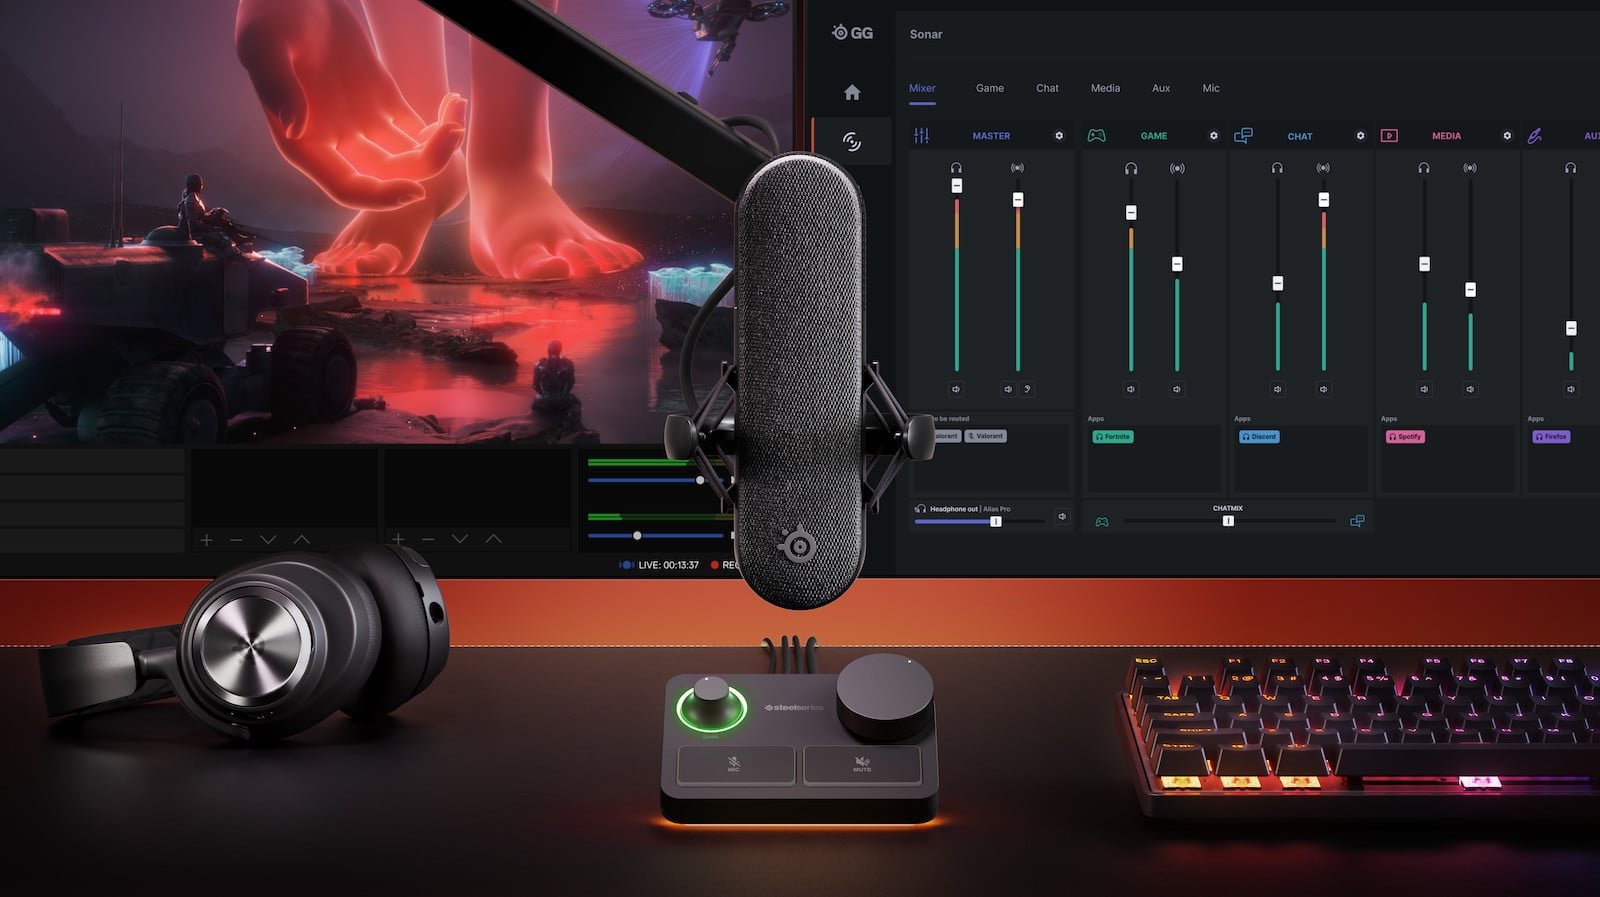 SteelSeries Alias Boom Arm has hidden-channel cable management for a tidy gaming setup